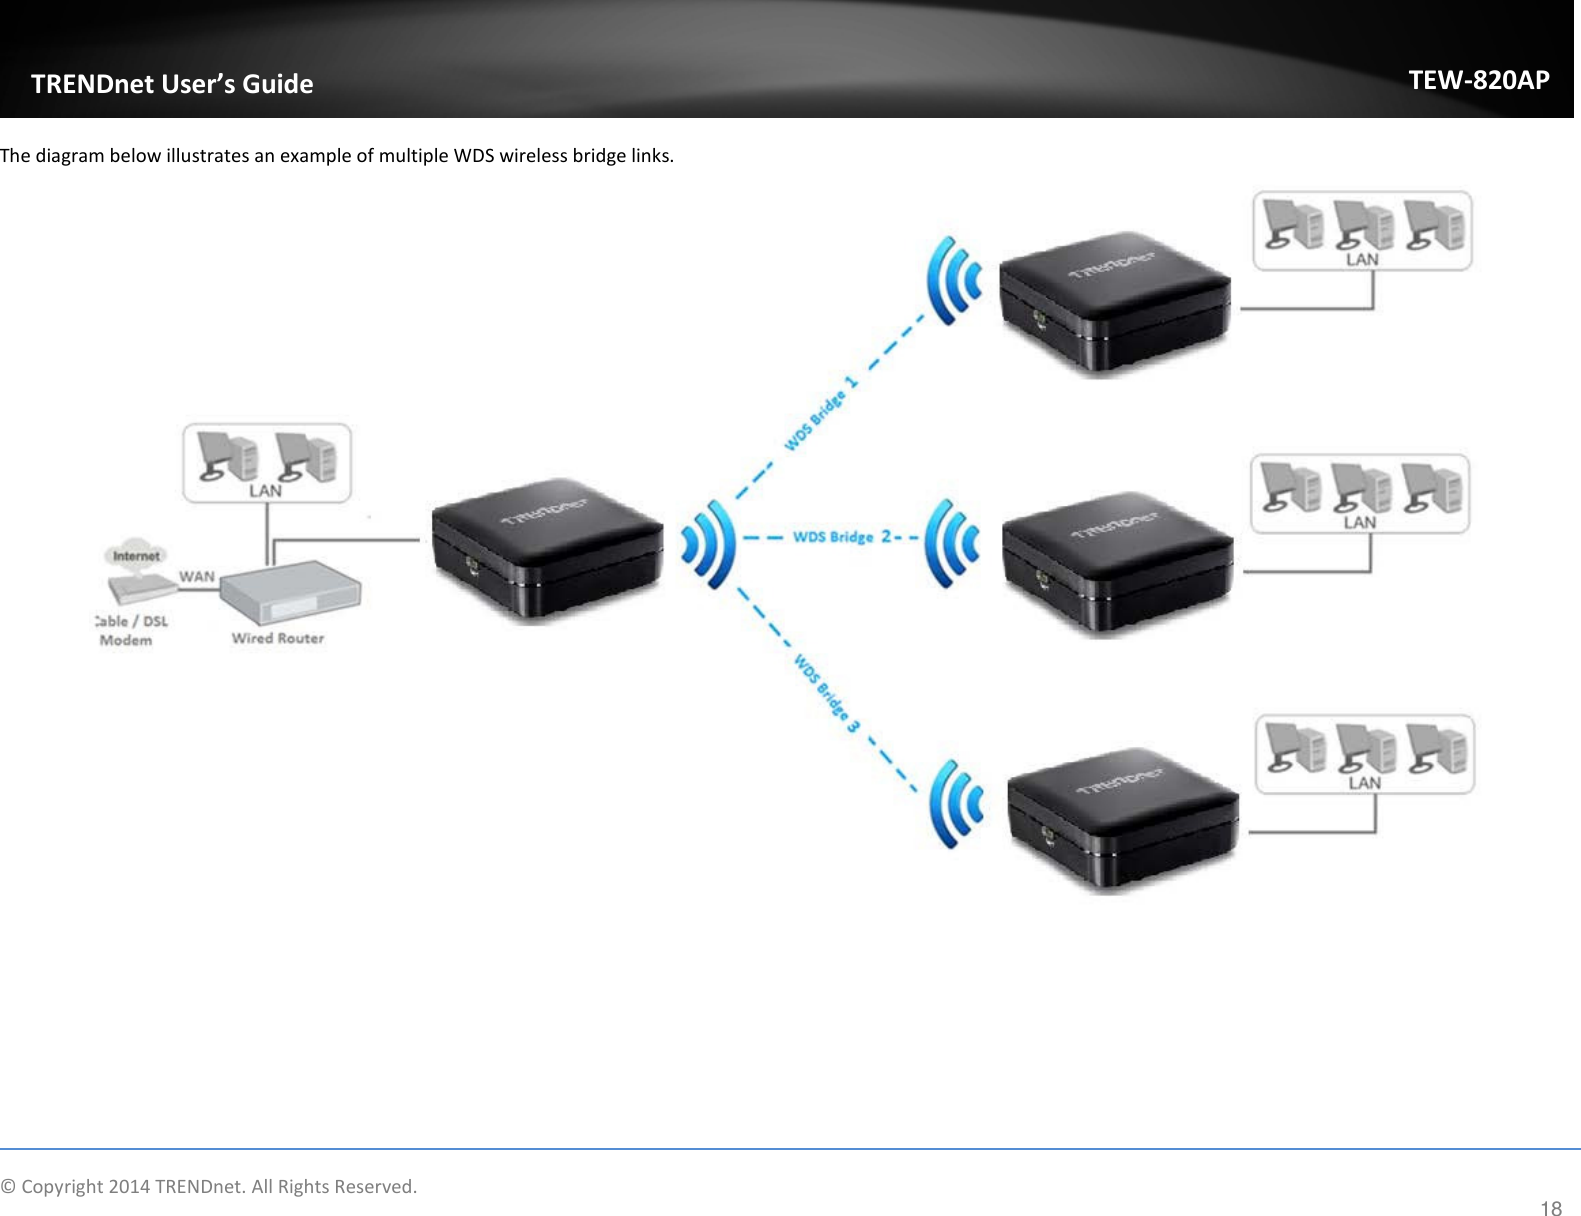             TRENDnet User’s Guide TEW-820AP The diagram below illustrates an example of multiple WDS wireless bridge links.   © Copyright 2014 TRENDnet. All Rights Reserved.      18 